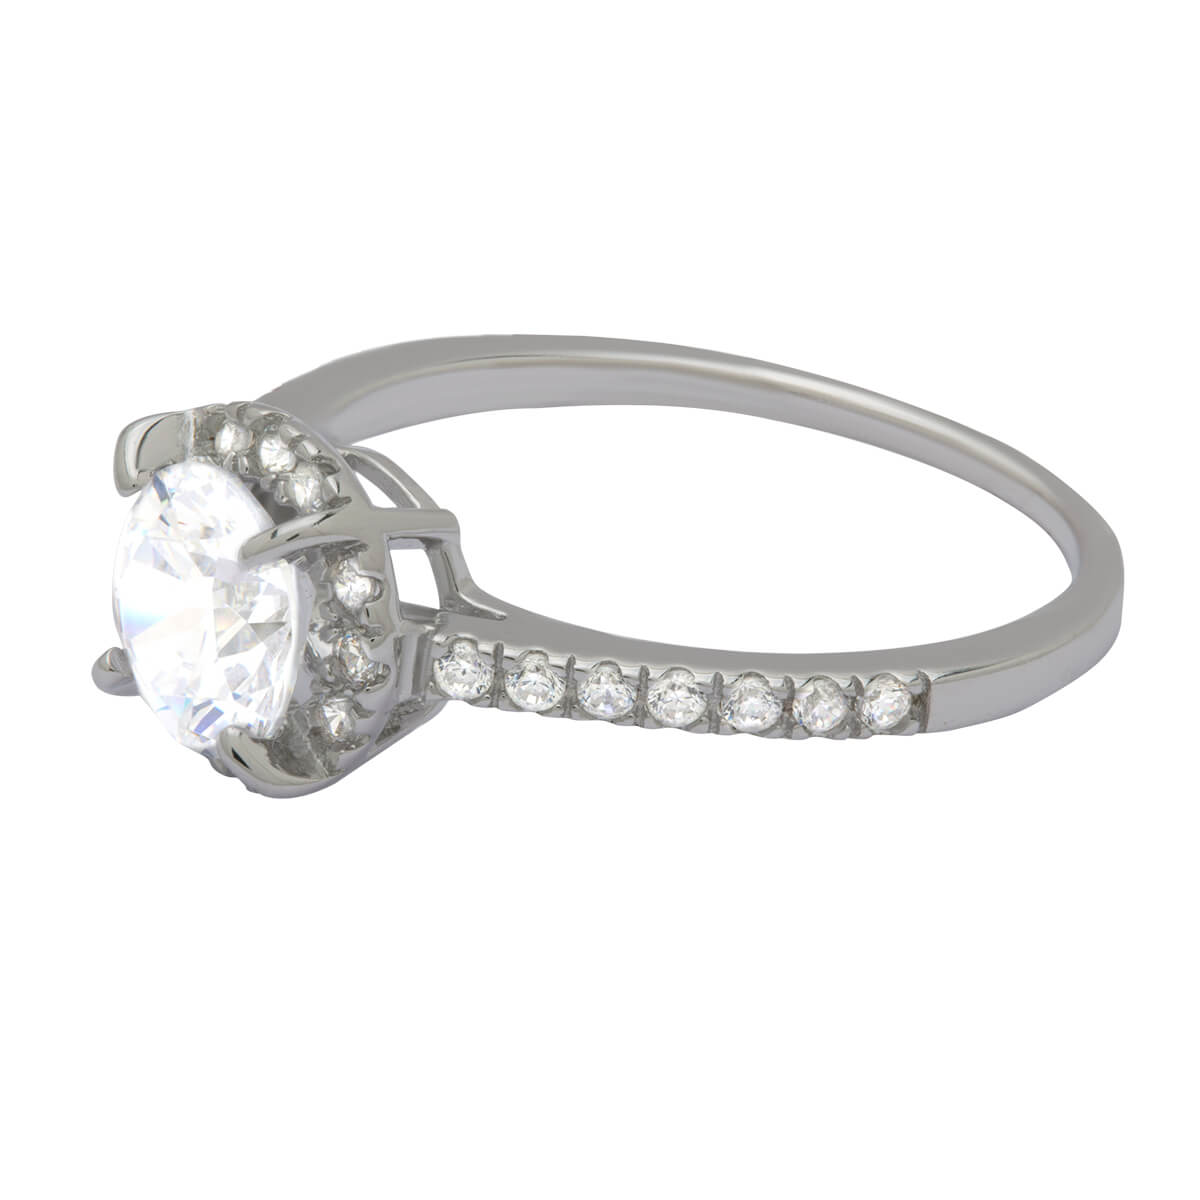 Dreamy Solitaire Silver Ring